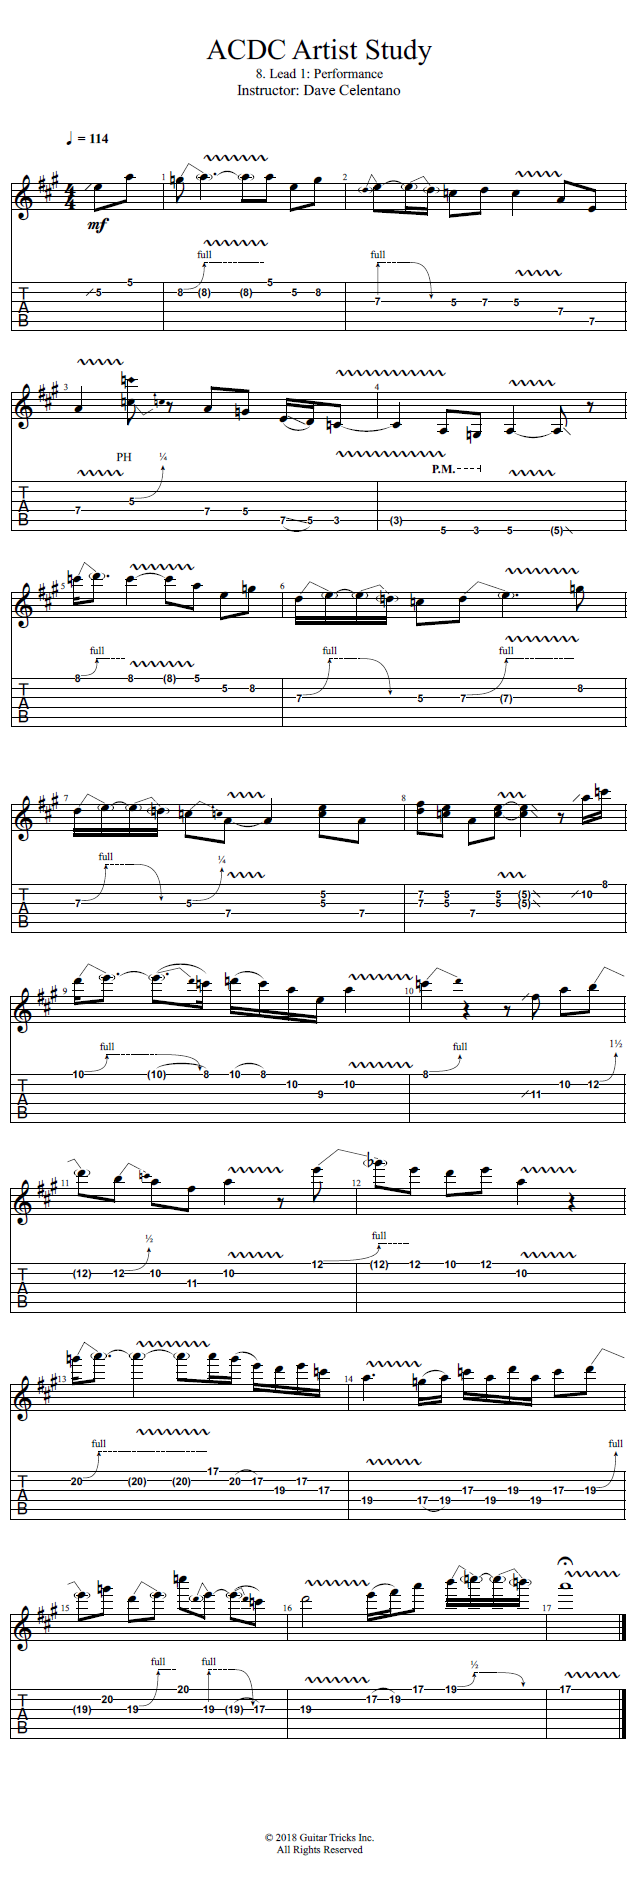 Lead 1: Performance song notation